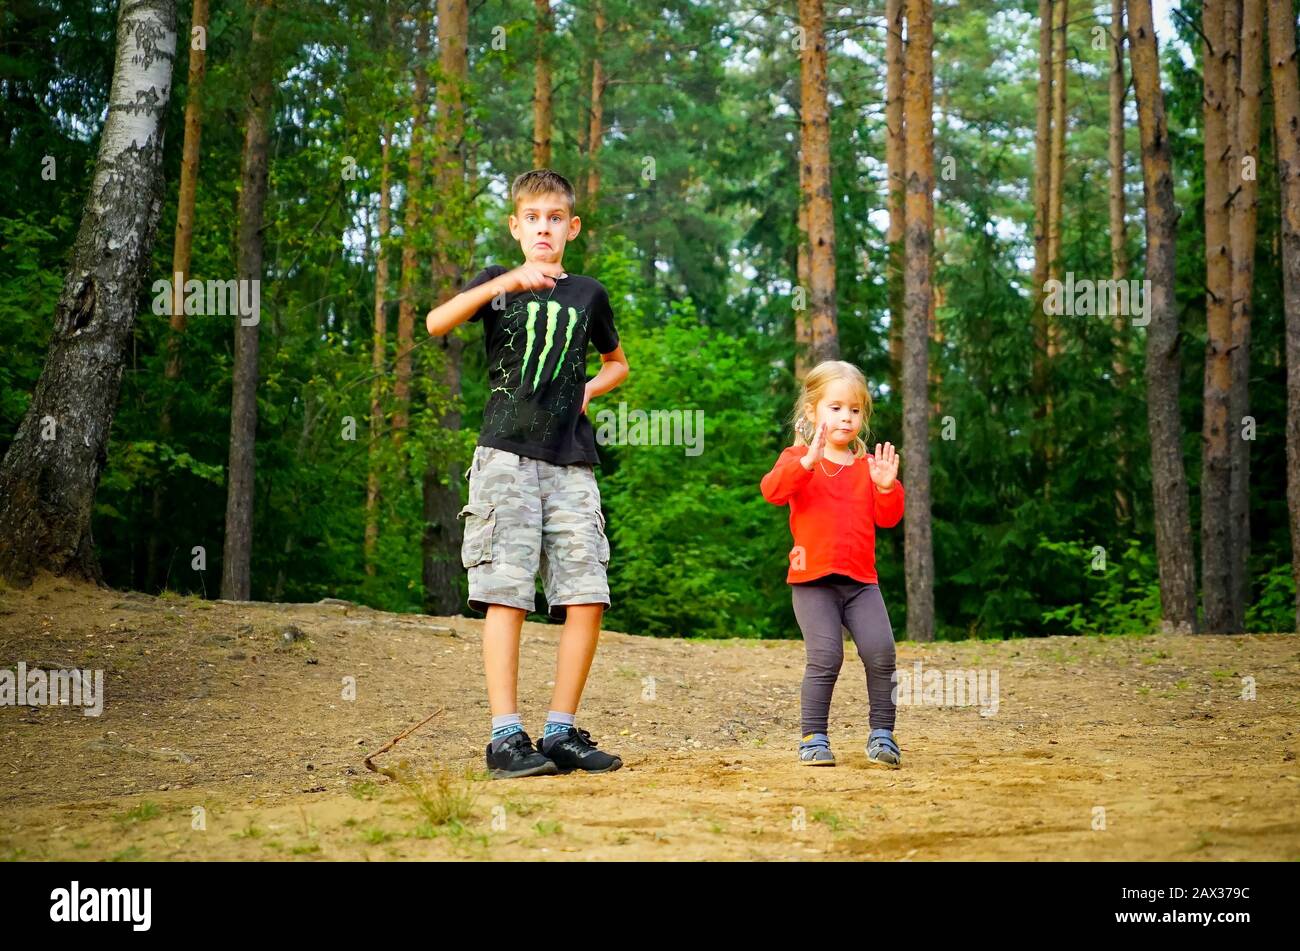 A boy and a girl are dancing merrily in a clearing in the forest Stock Photo